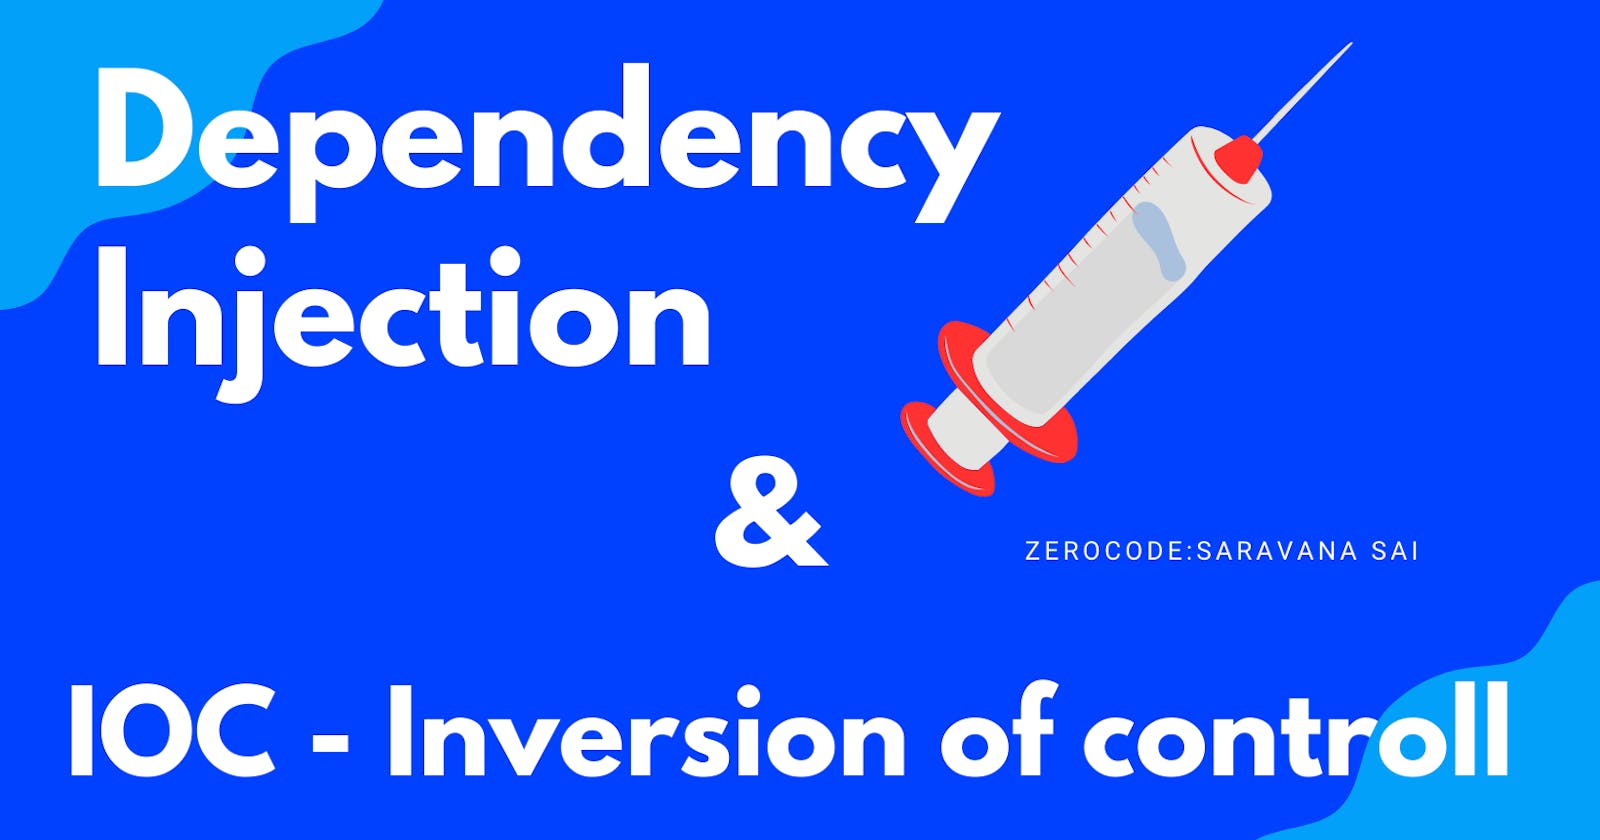 Dependency Injection & IOC - Inversion of control explained in depth